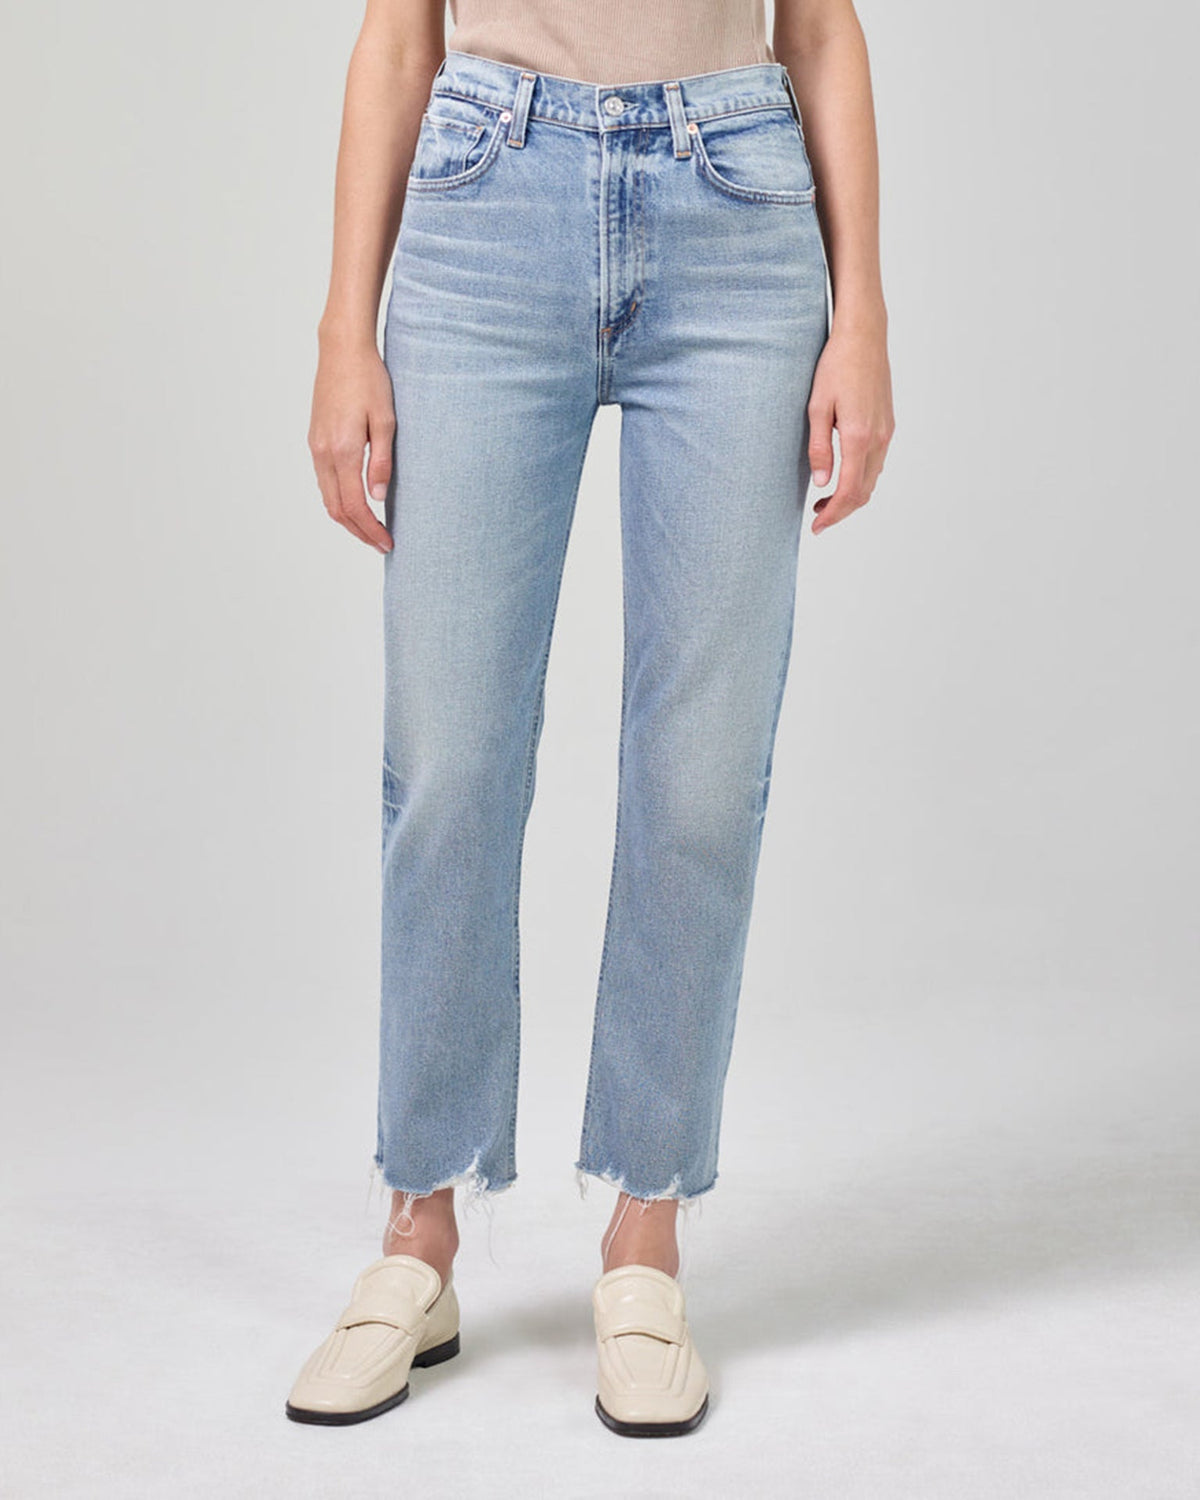 Citizens of Humanity Denim Daphne High Rise Stovepipe Crop in Checkmate